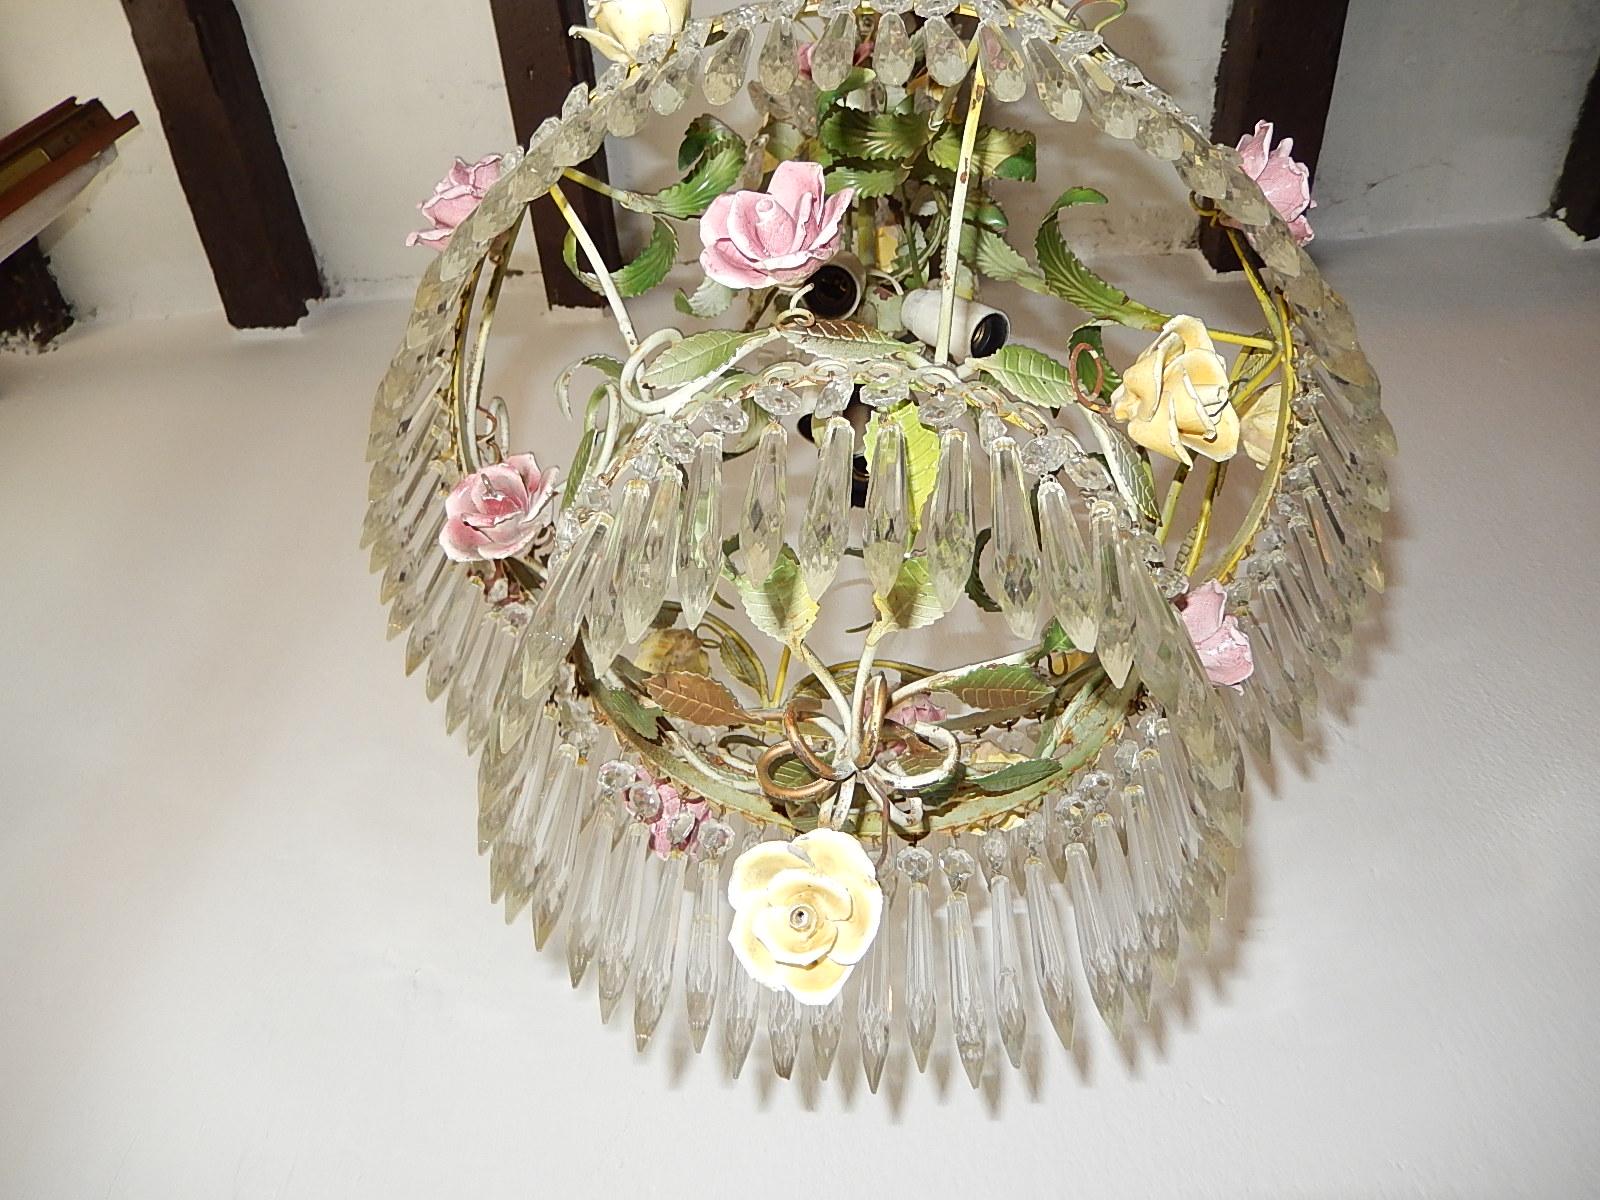 Mid-20th Century French Porcelain Rose and Crystal Prisms, Four-Tier Chandelier circa 1940 For Sale